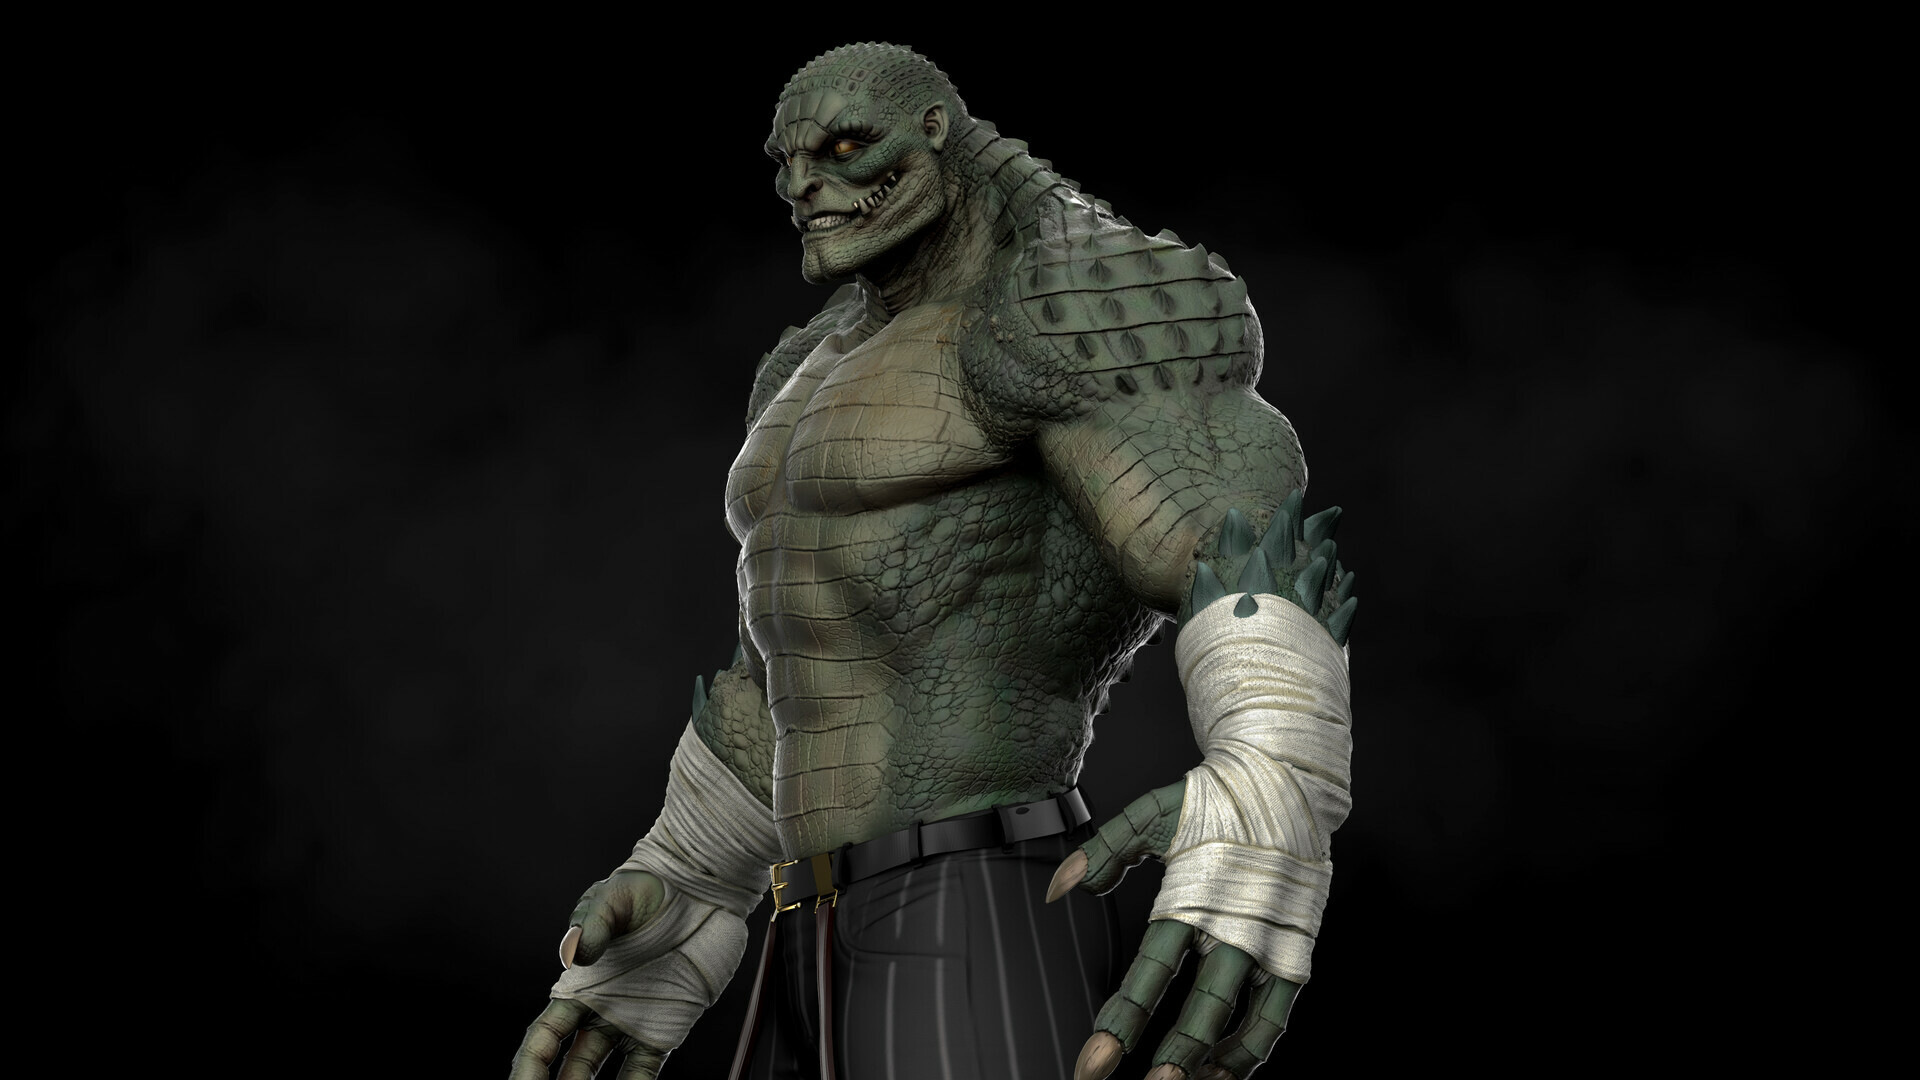 Killer Croc: One of Batman's most physically formidable foes, Known for his brutal strength and fearsome rage. 1920x1080 Full HD Wallpaper.